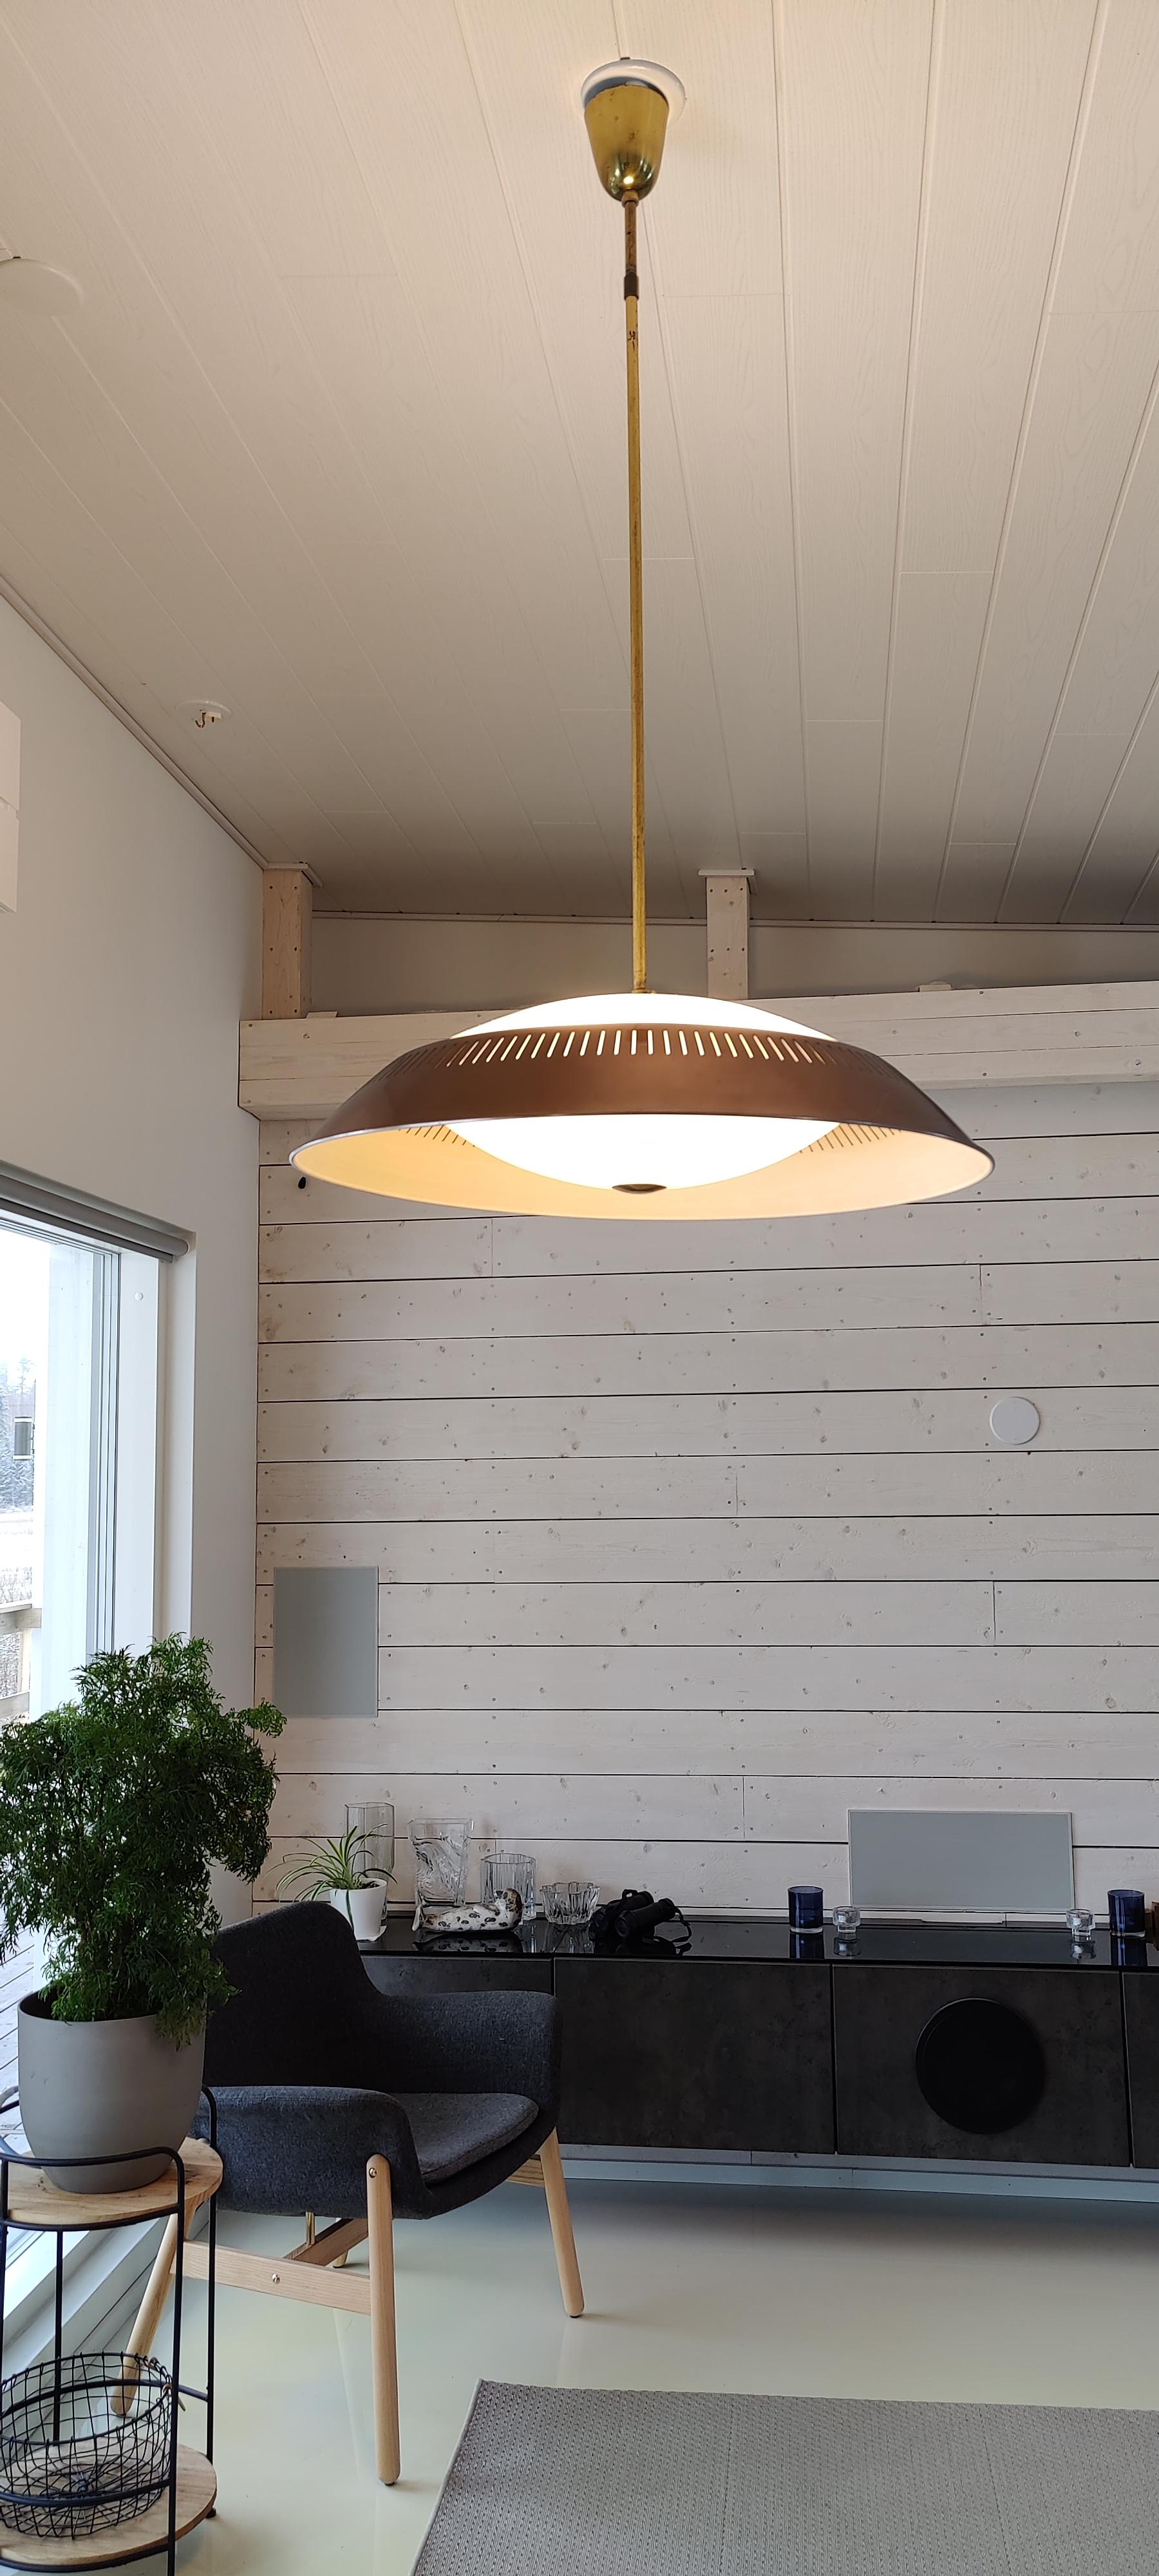 Mid-Century Modern Lisa Johansson-Pape Ceiling Lamp, Model 1102, Procuded by Orno in Finland, 1953 For Sale